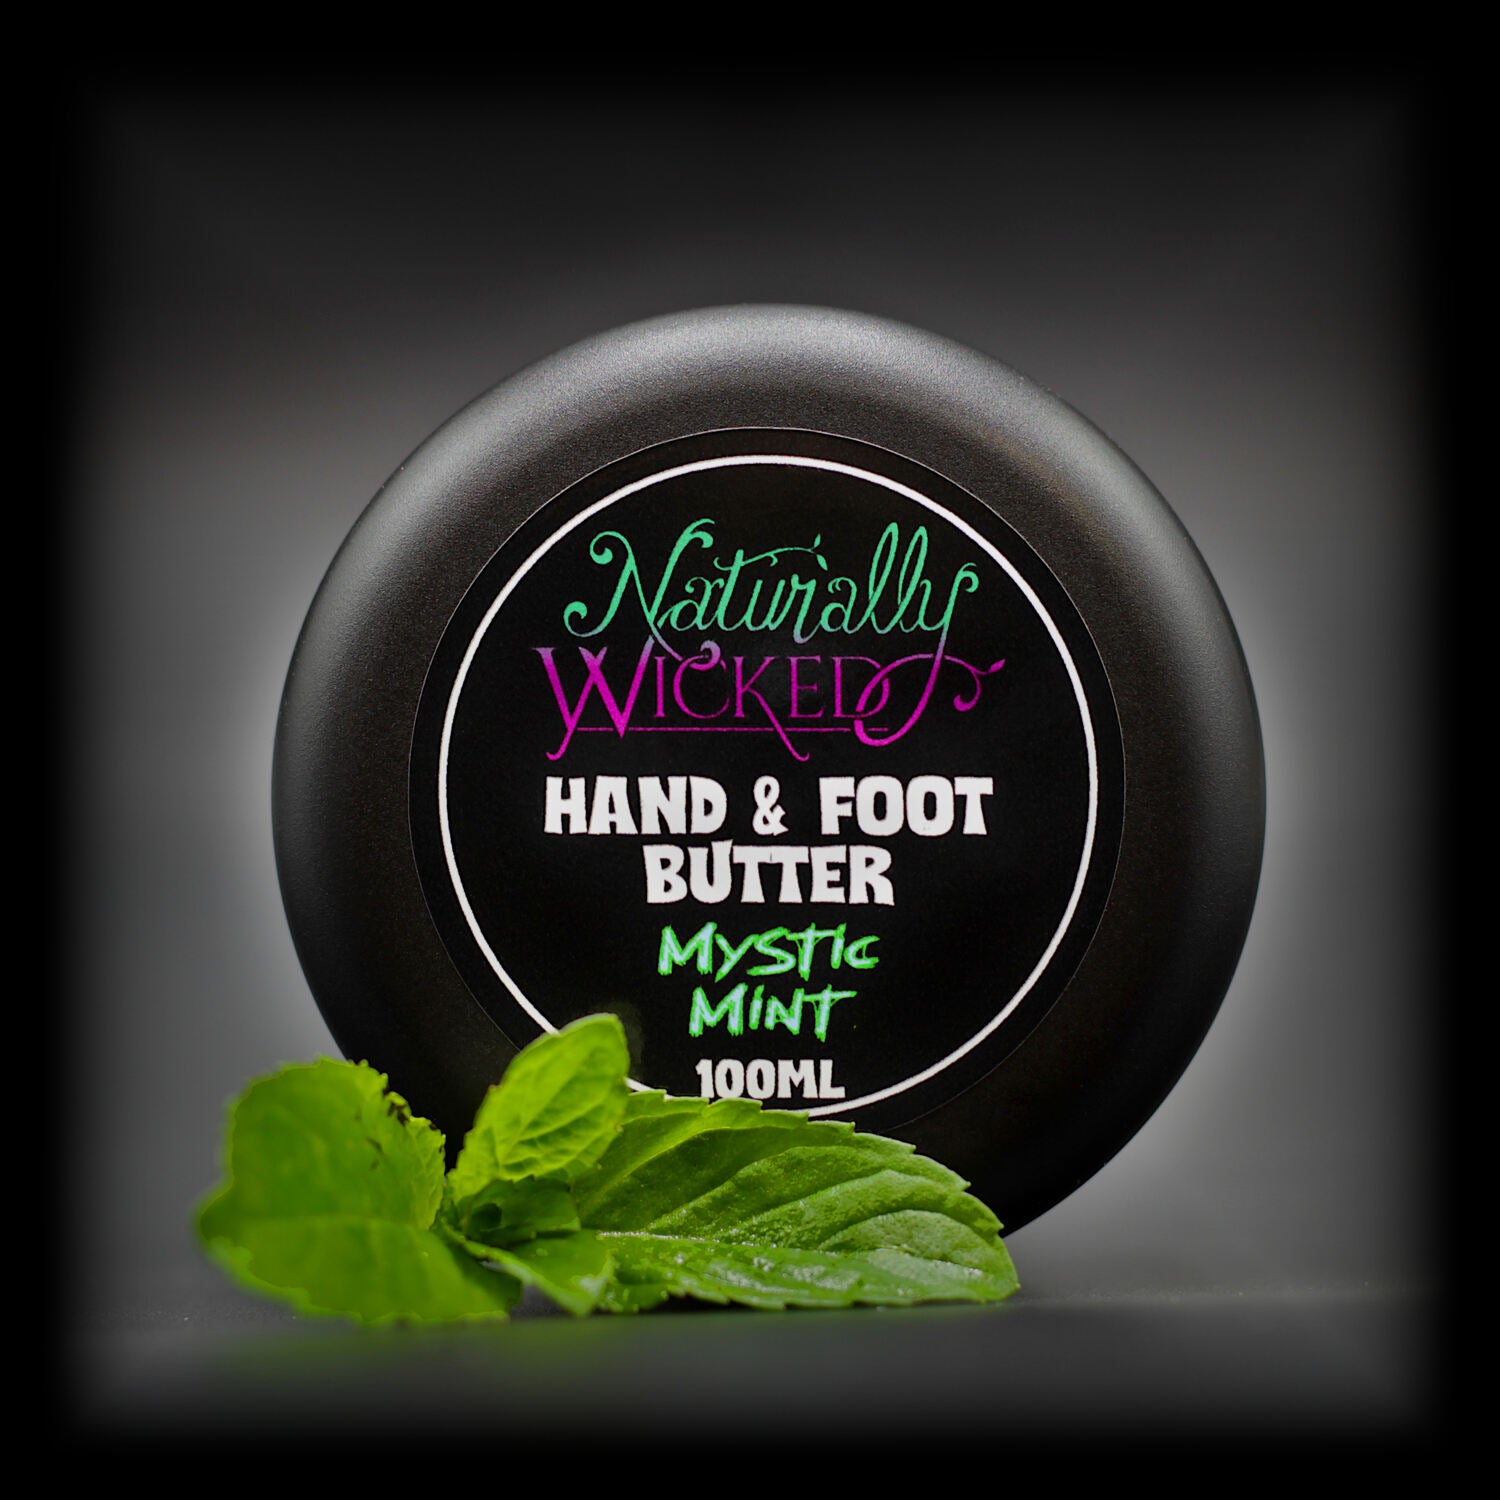 Naturally Wicked Mystic Mint Hand & Foot Butter Classy Black Lid Amongst Bright Green Fresh Mint Leaves